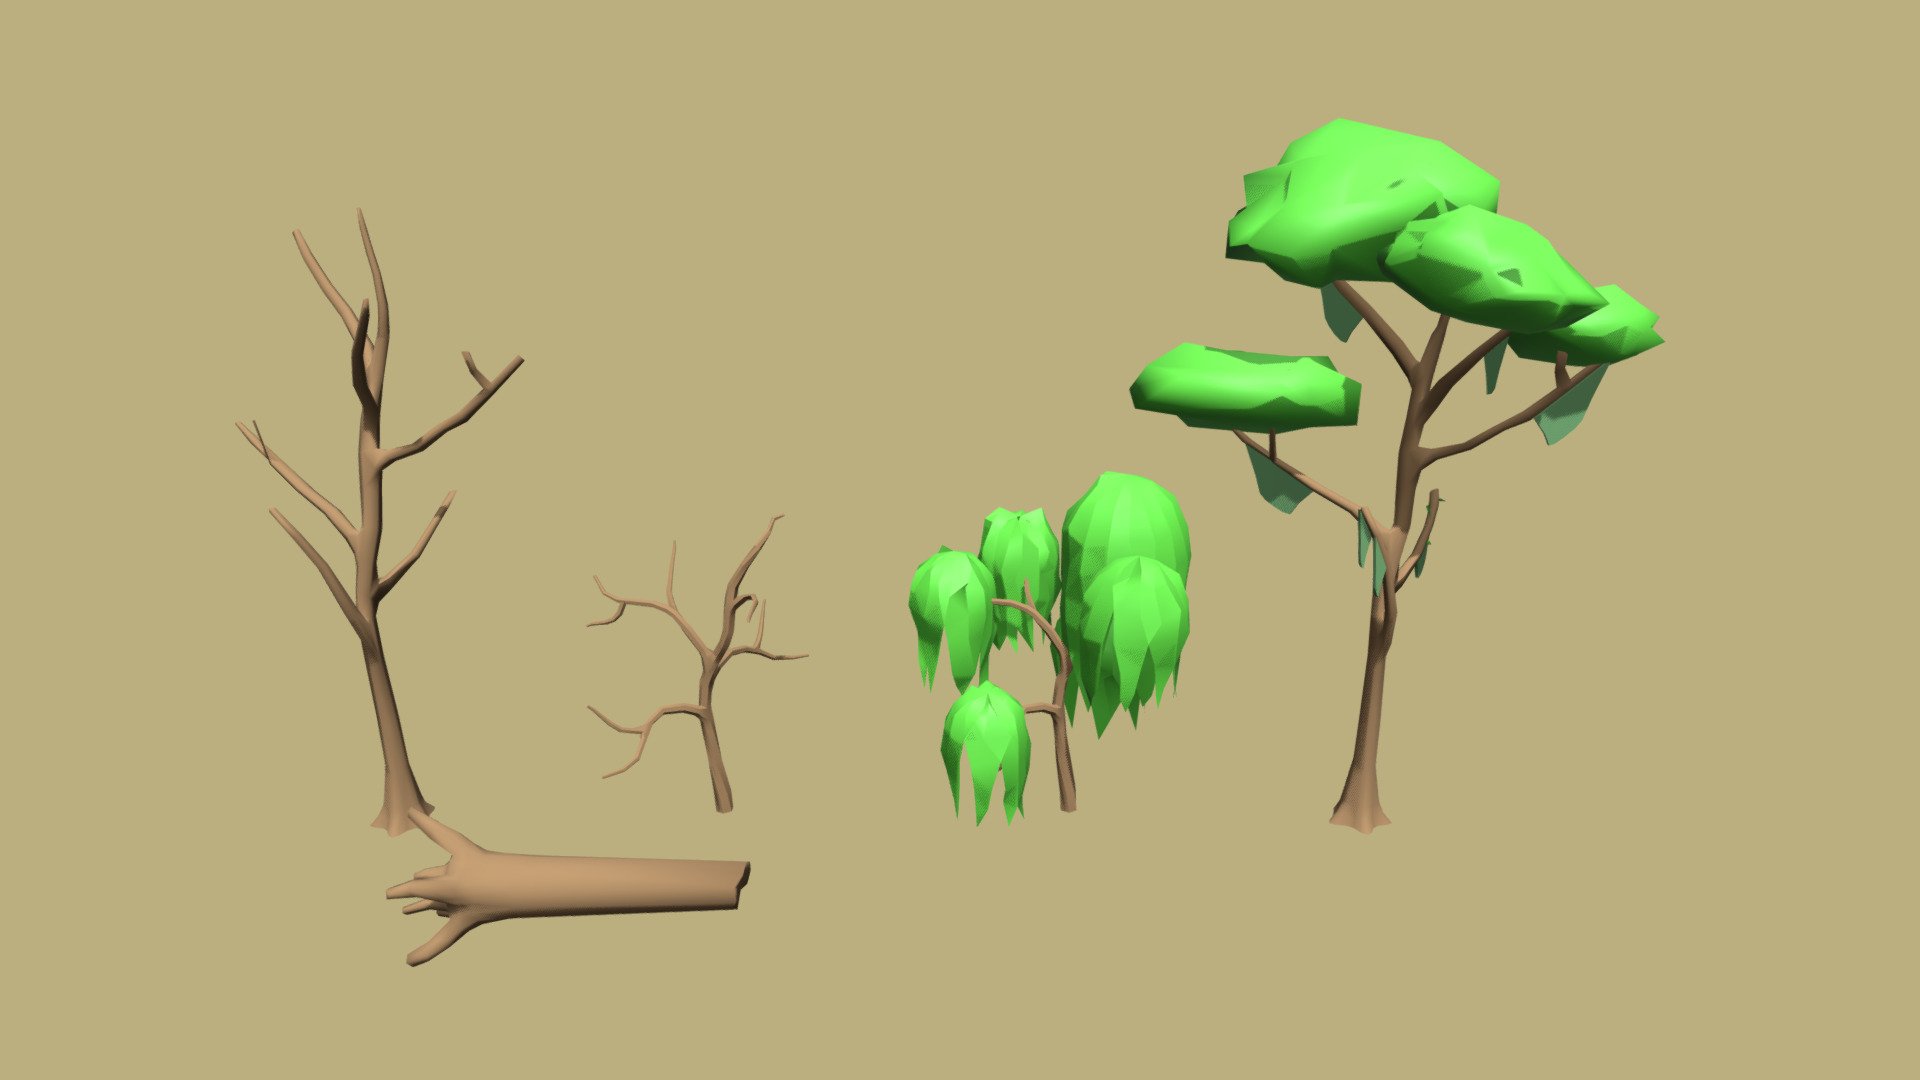 Trees, dead trees and branches for a cartoon swamp or wetlands environment. Cartoon style, material colors only. These models are part of my PolySwamp collection 3d model